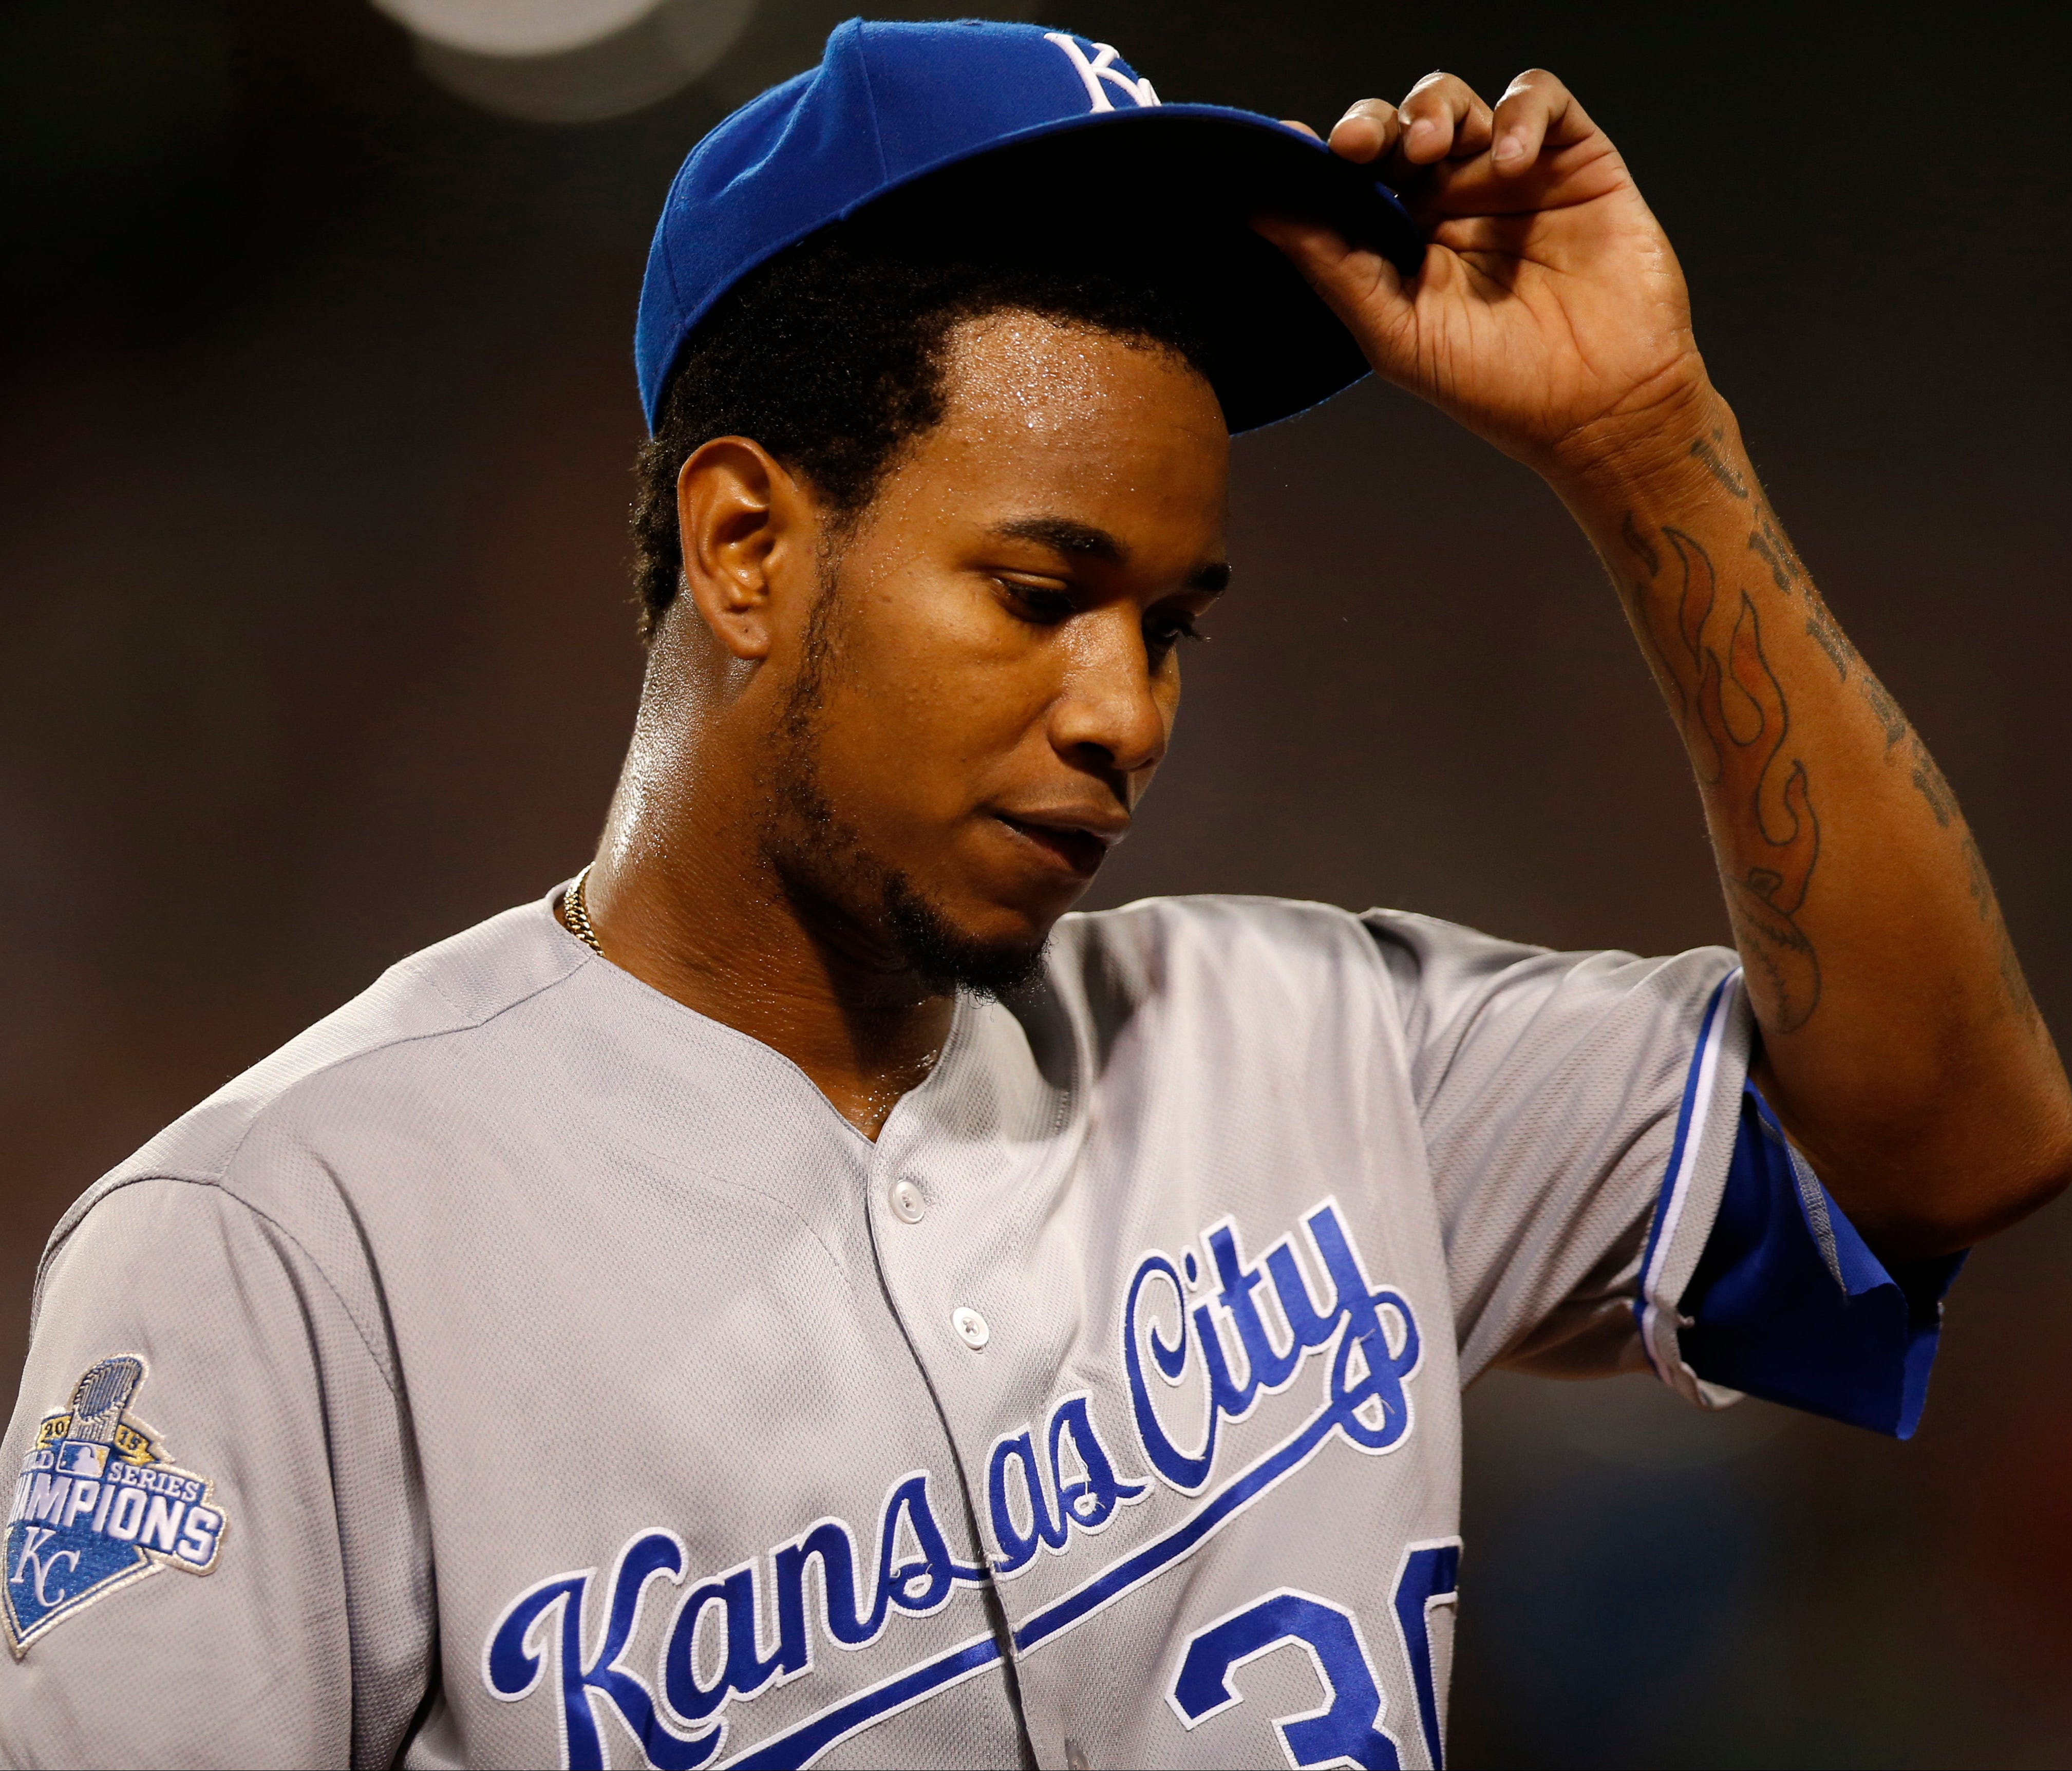 Yordano Ventura started 93 games in his career with the Royals, posting a 38-31 record and 3.89 ERA.